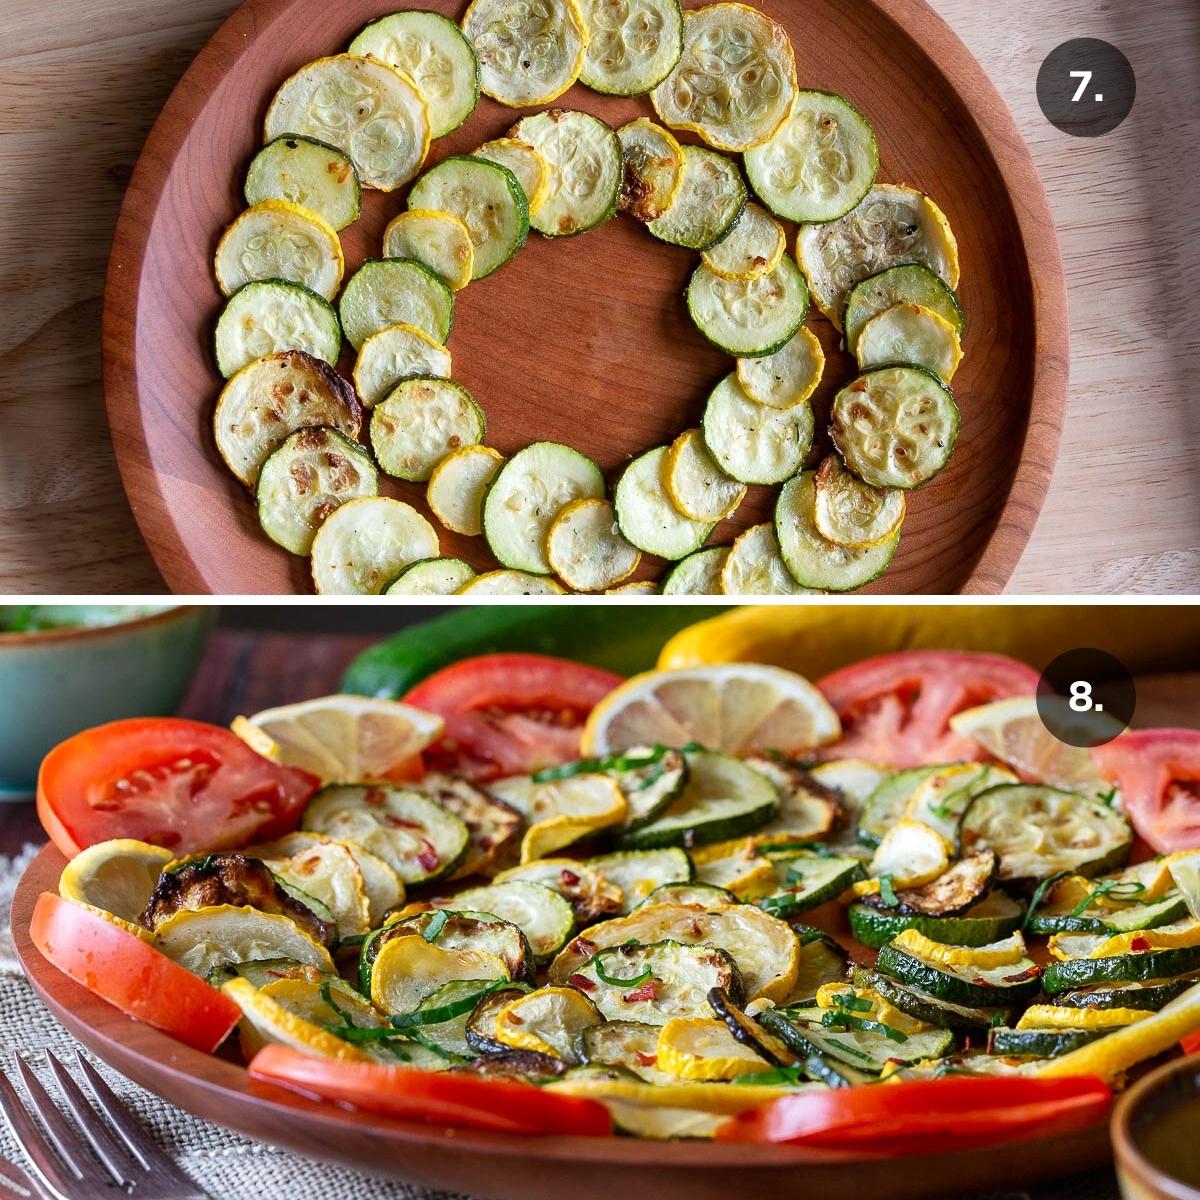 Air fried roasted zucchini and squash artfully layered in a wooden plate and garnished.